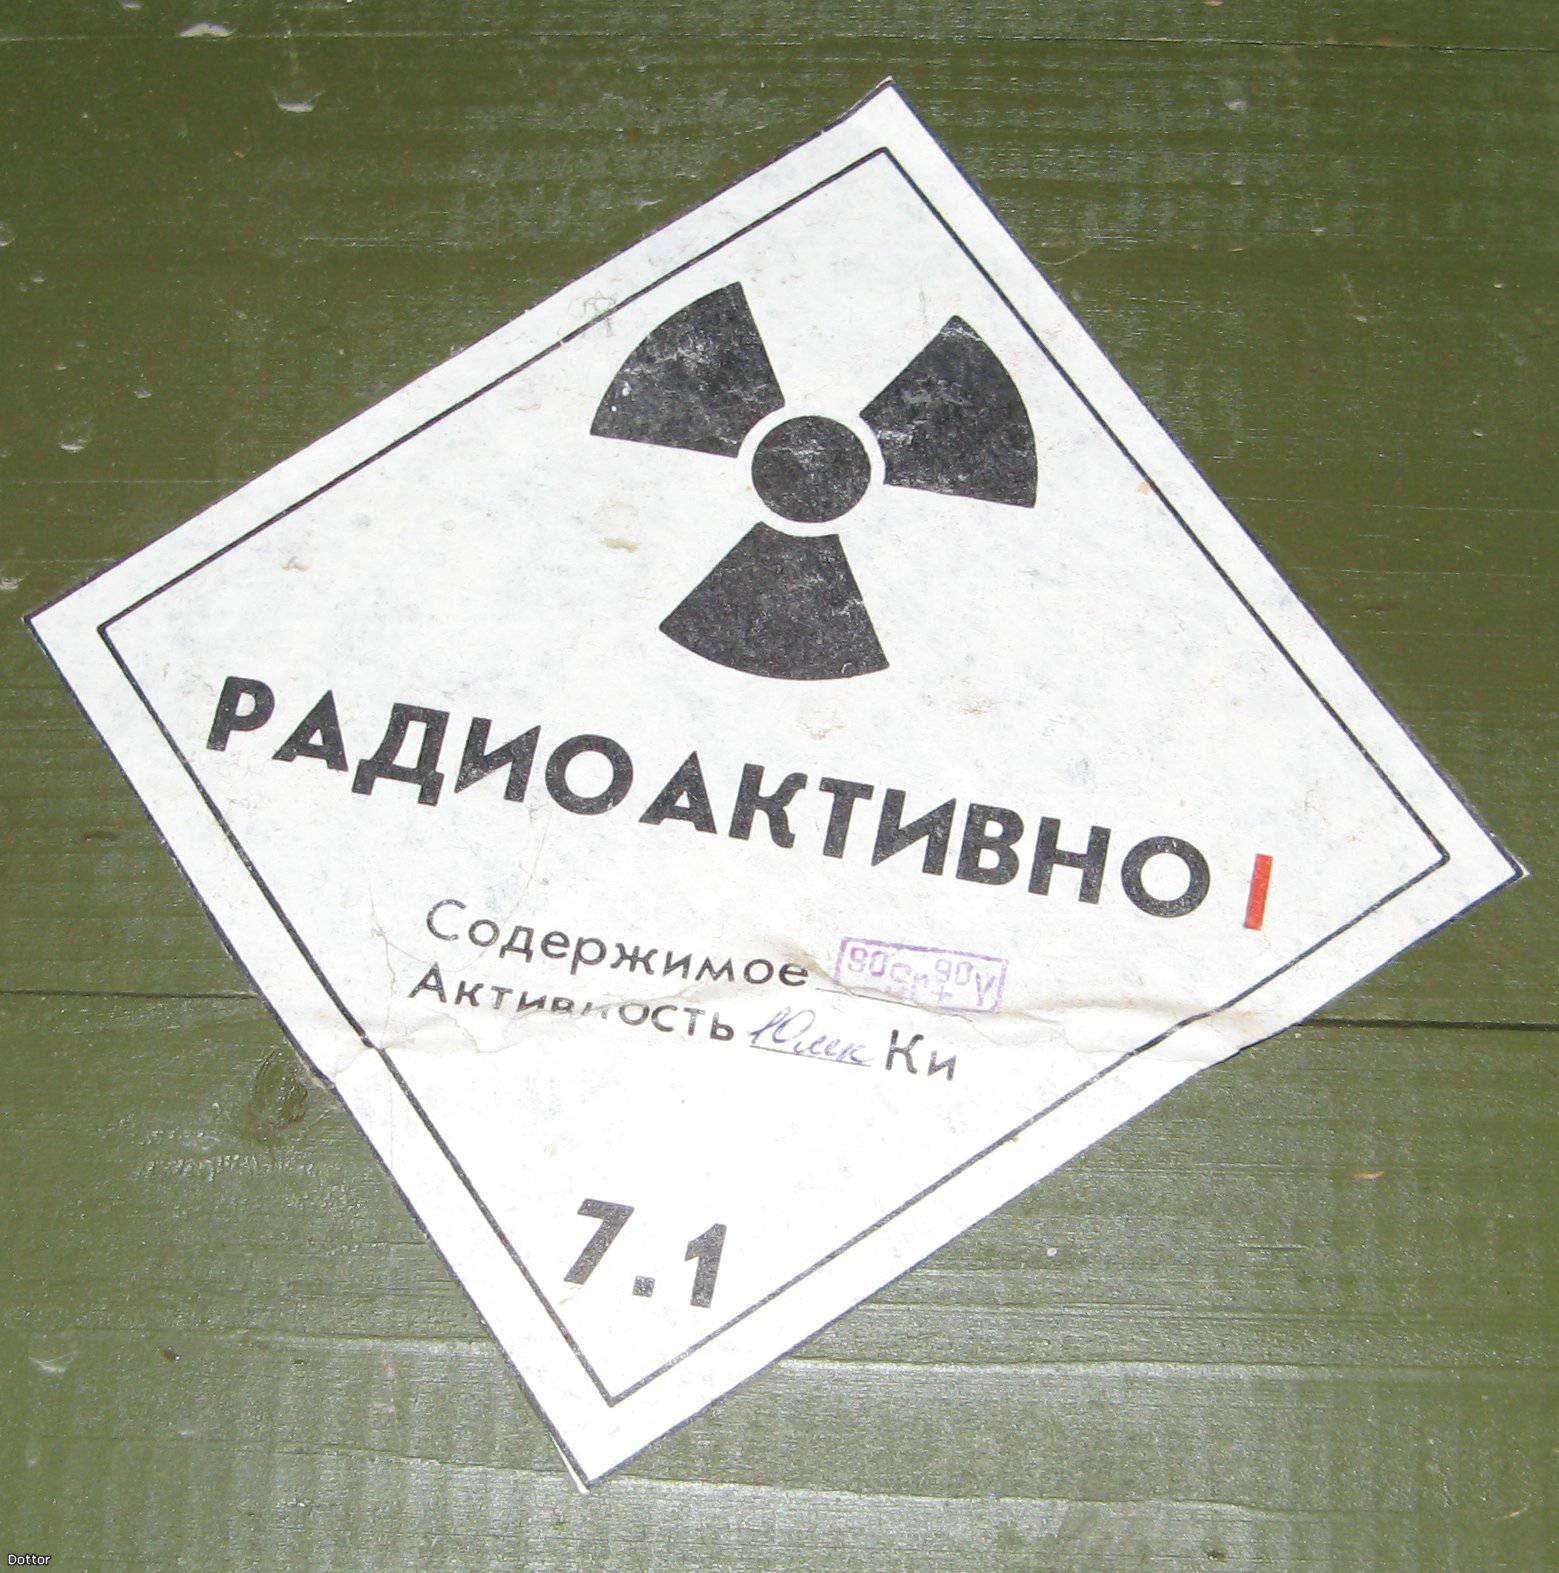 It publishes the Moscow Nuclear Safety and Security Summit Declaration, the Programme for preventing and combating illicit trafficking in nuclear material, the Statement on the Comprehensive Nuclear Test Ban Treaty, as well as a background document on nuclear safety and security and the Summit chronology